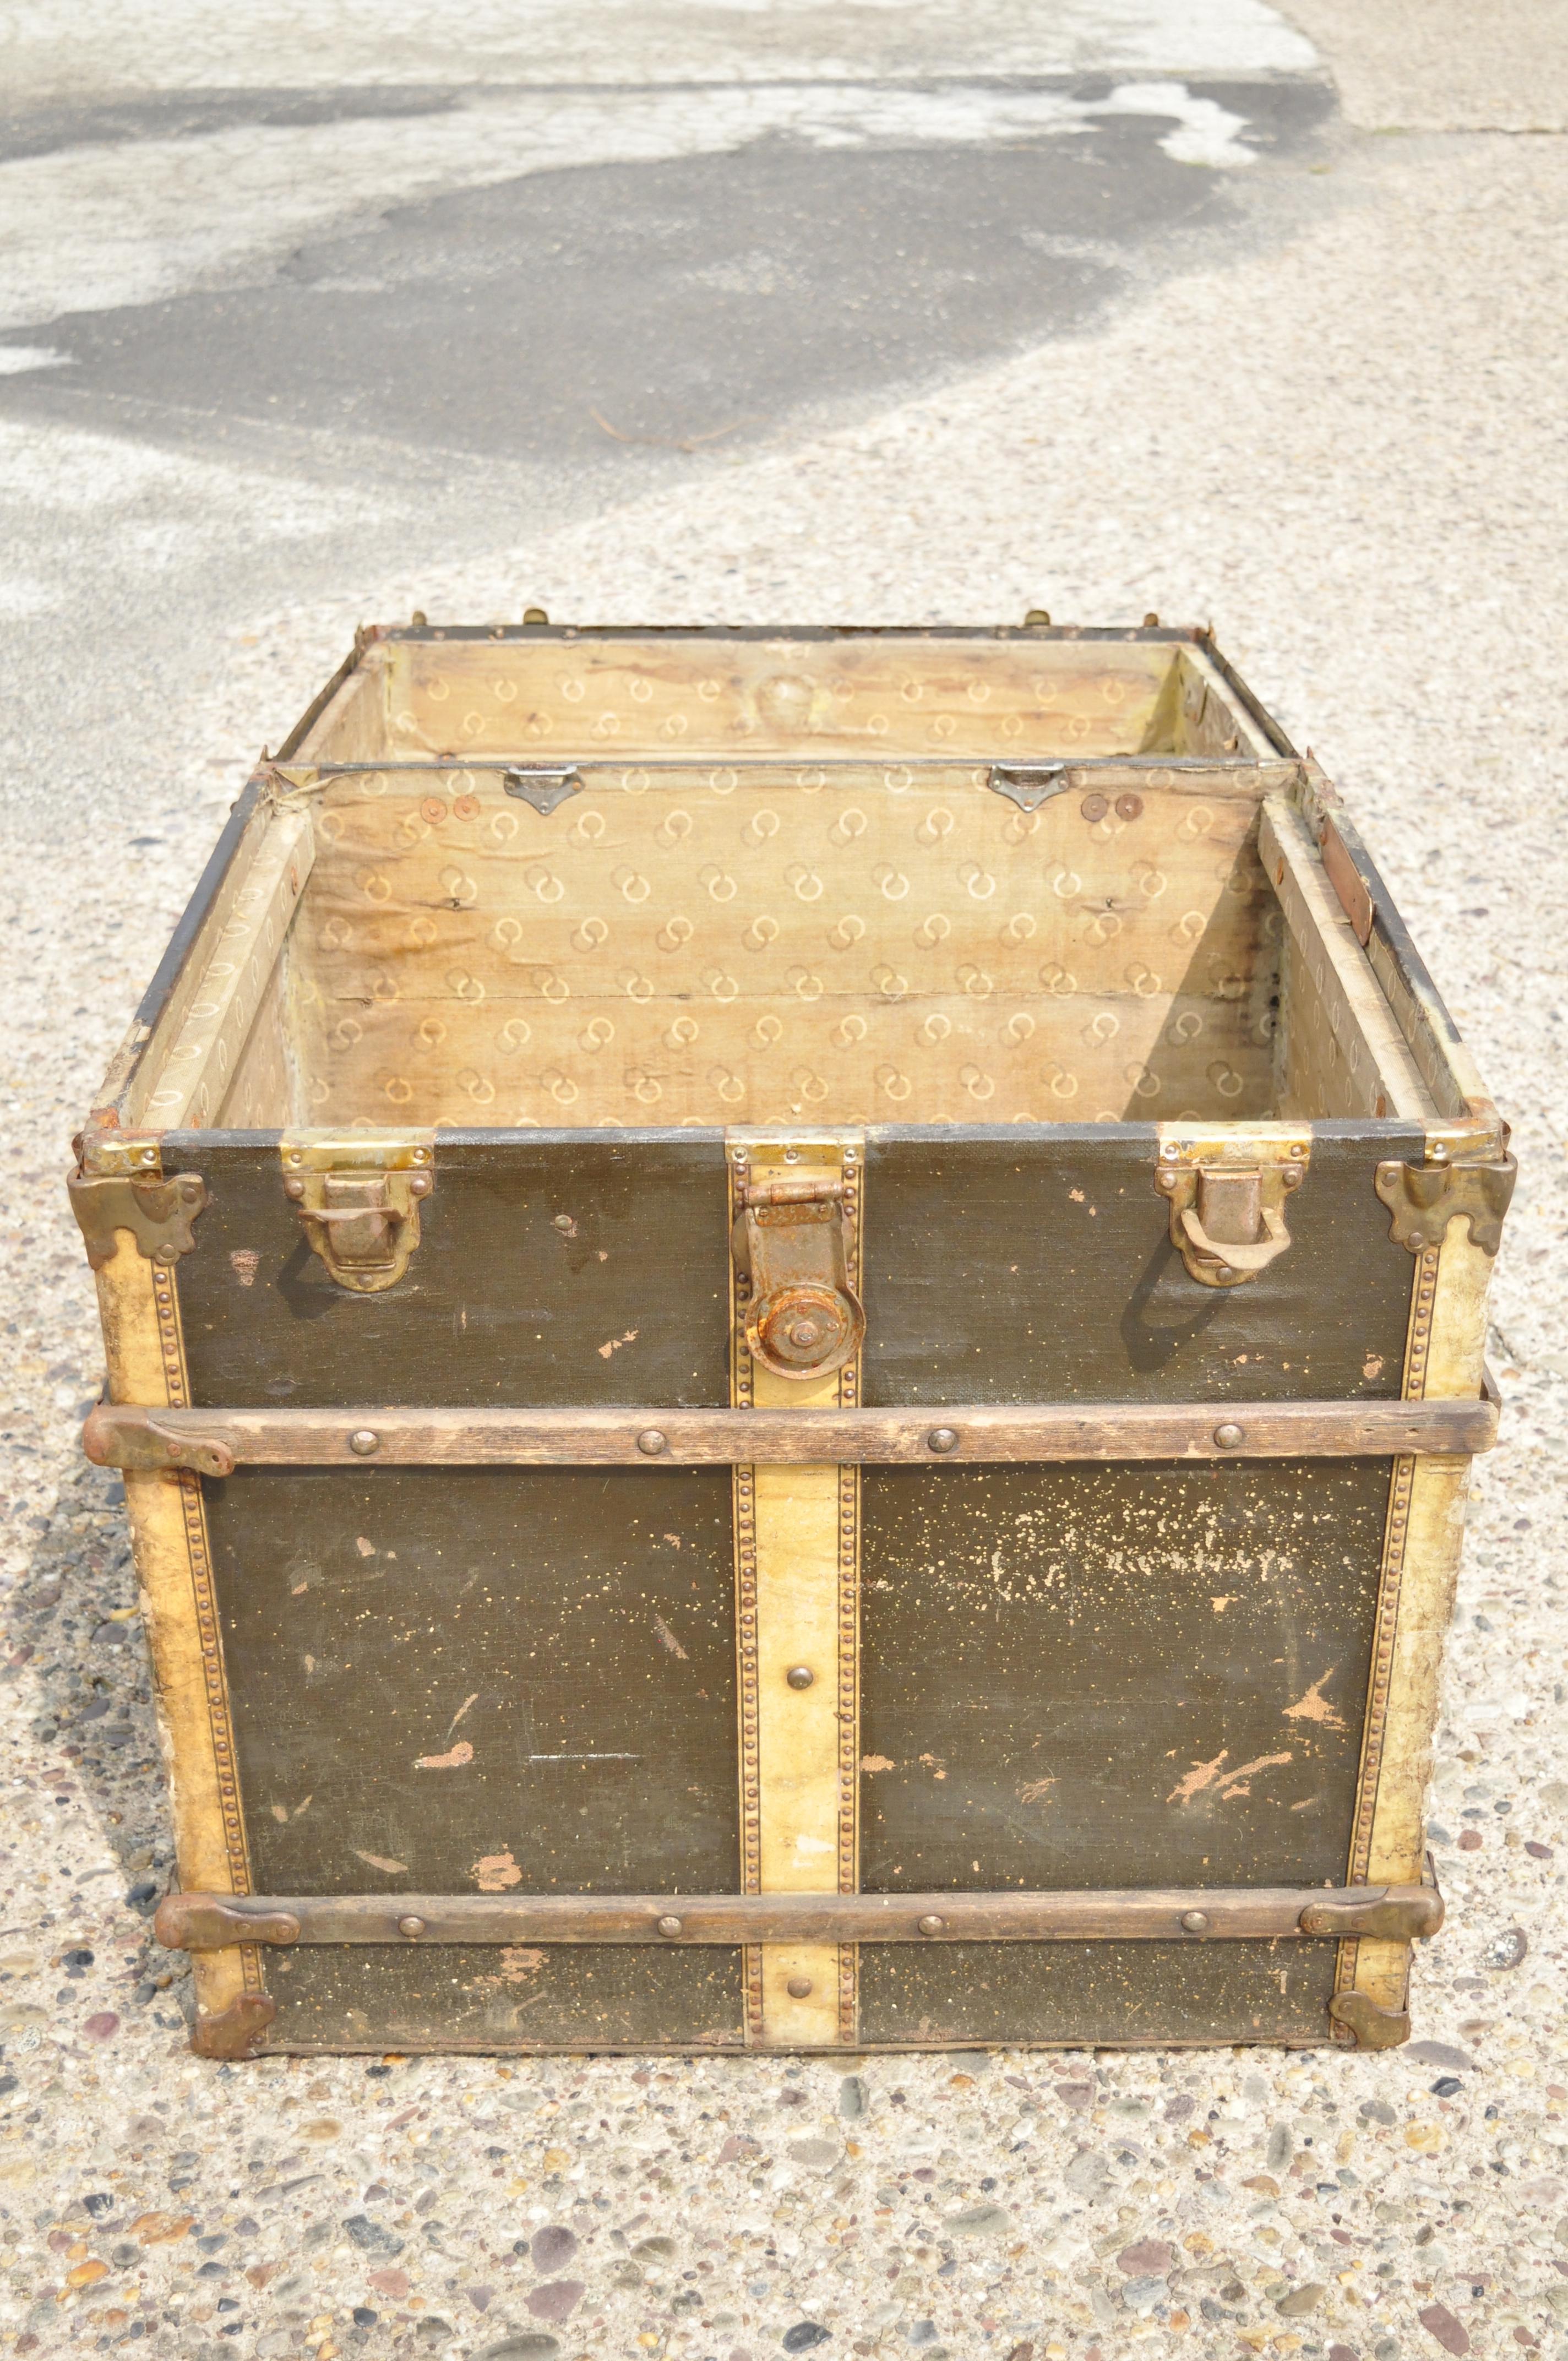 20th Century Arts & Crafts Mission Victorian Storage Trunk Chest with Distressed Finish